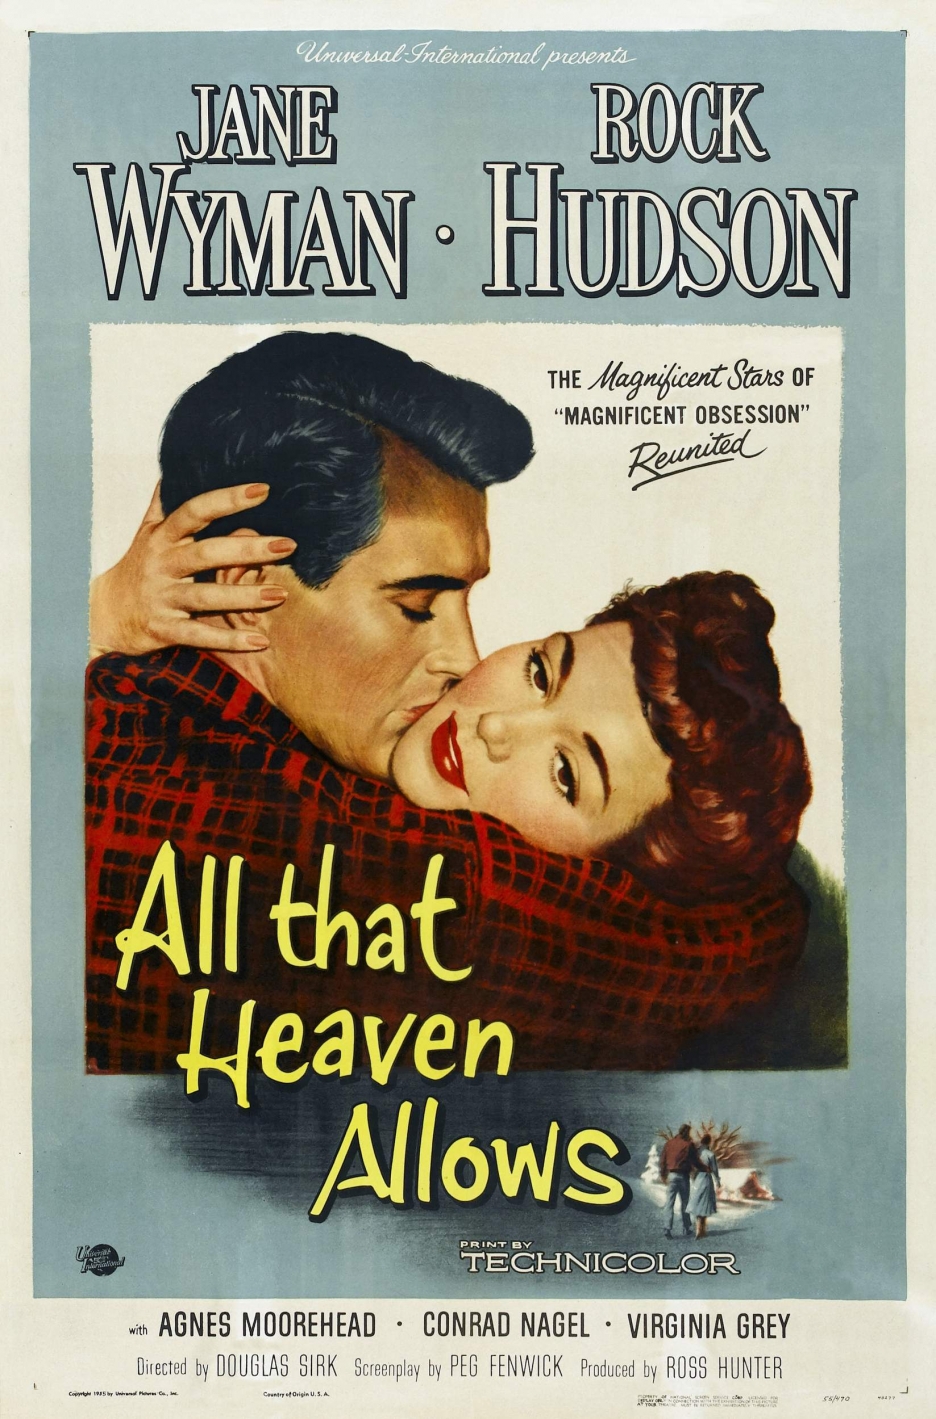 http://thefilmstage.com/wp-content/uploads/2014/08/936full-all-that-heaven-allows-poster.jpg